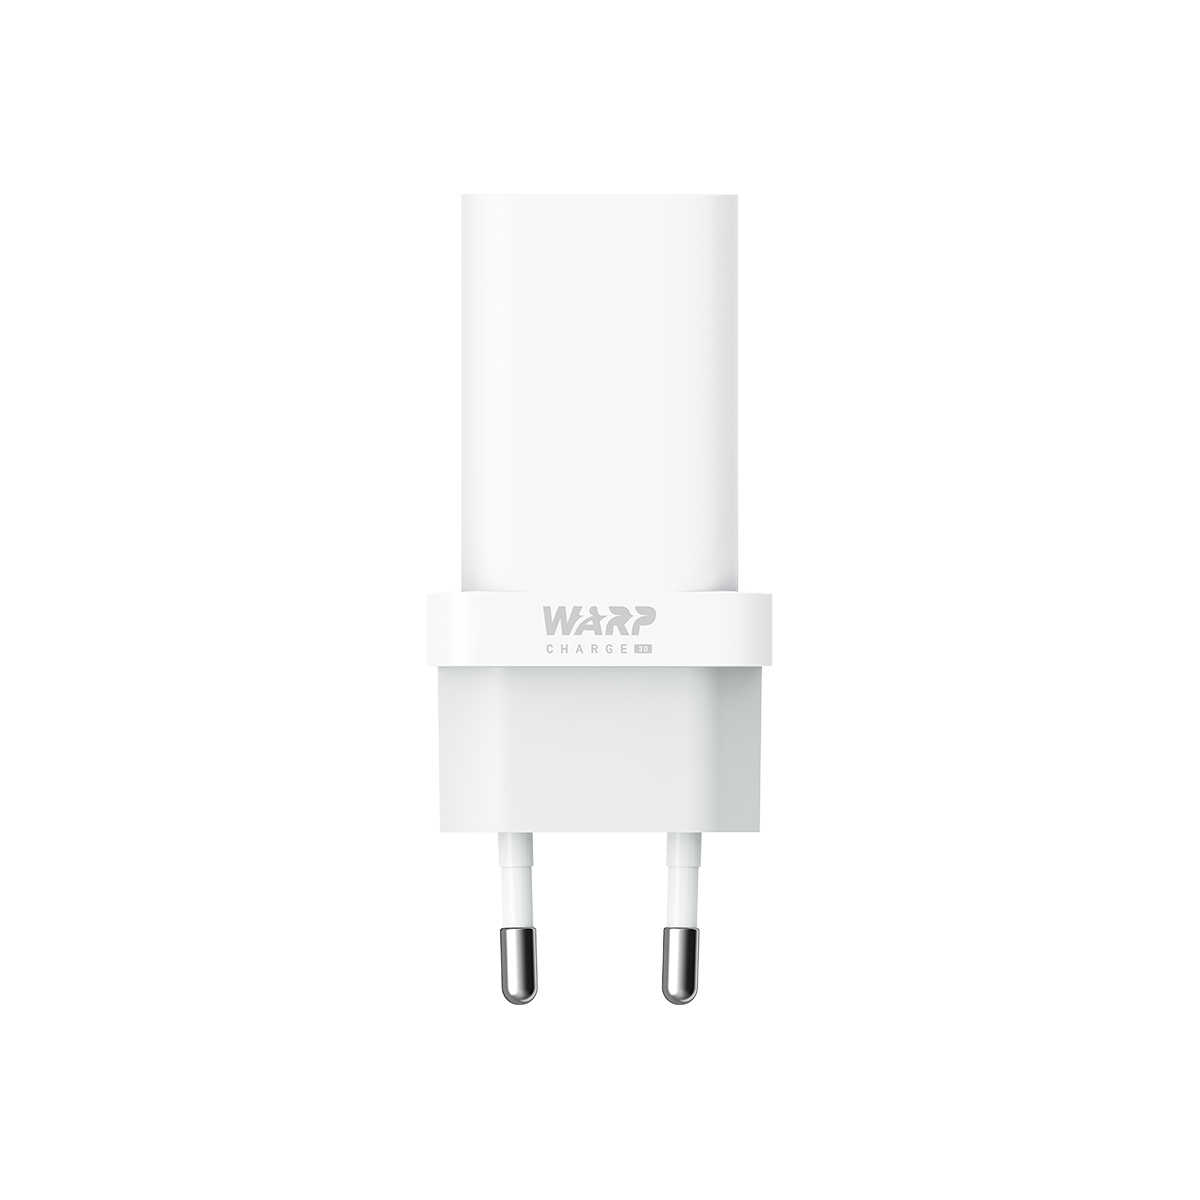 OnePlus-30W-Warp-Charge-USB-Wall-Charger-Adapter-With-US-Plug-EU-Plug-For-OnePlus-8-OnePlus-8-Pro-fo-1726202